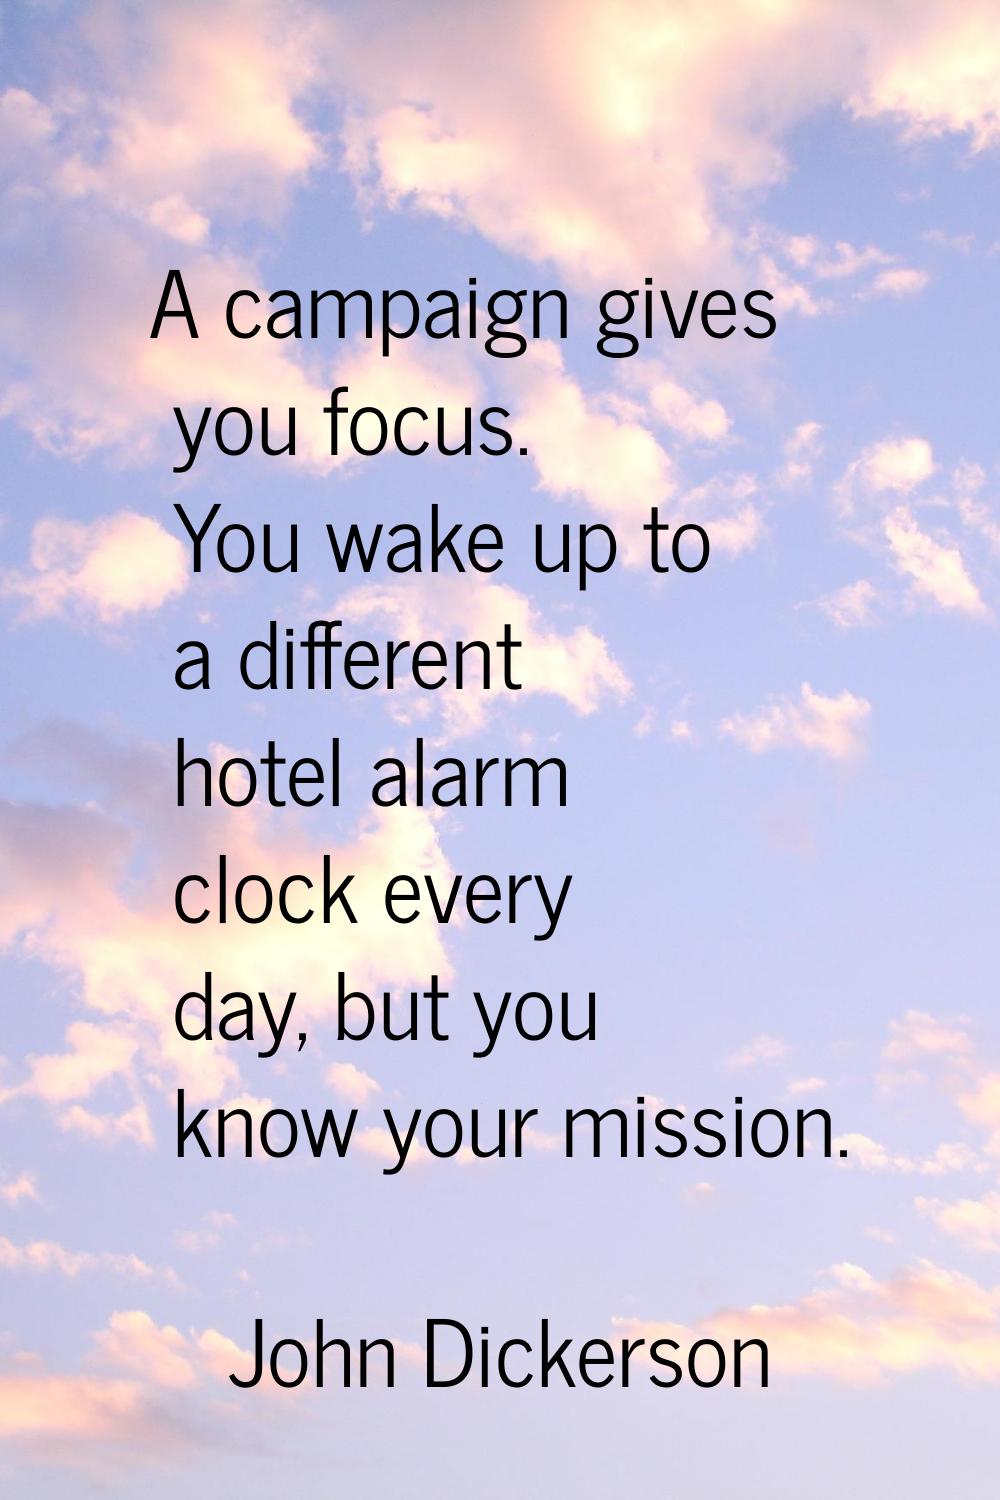 A campaign gives you focus. You wake up to a different hotel alarm clock every day, but you know yo